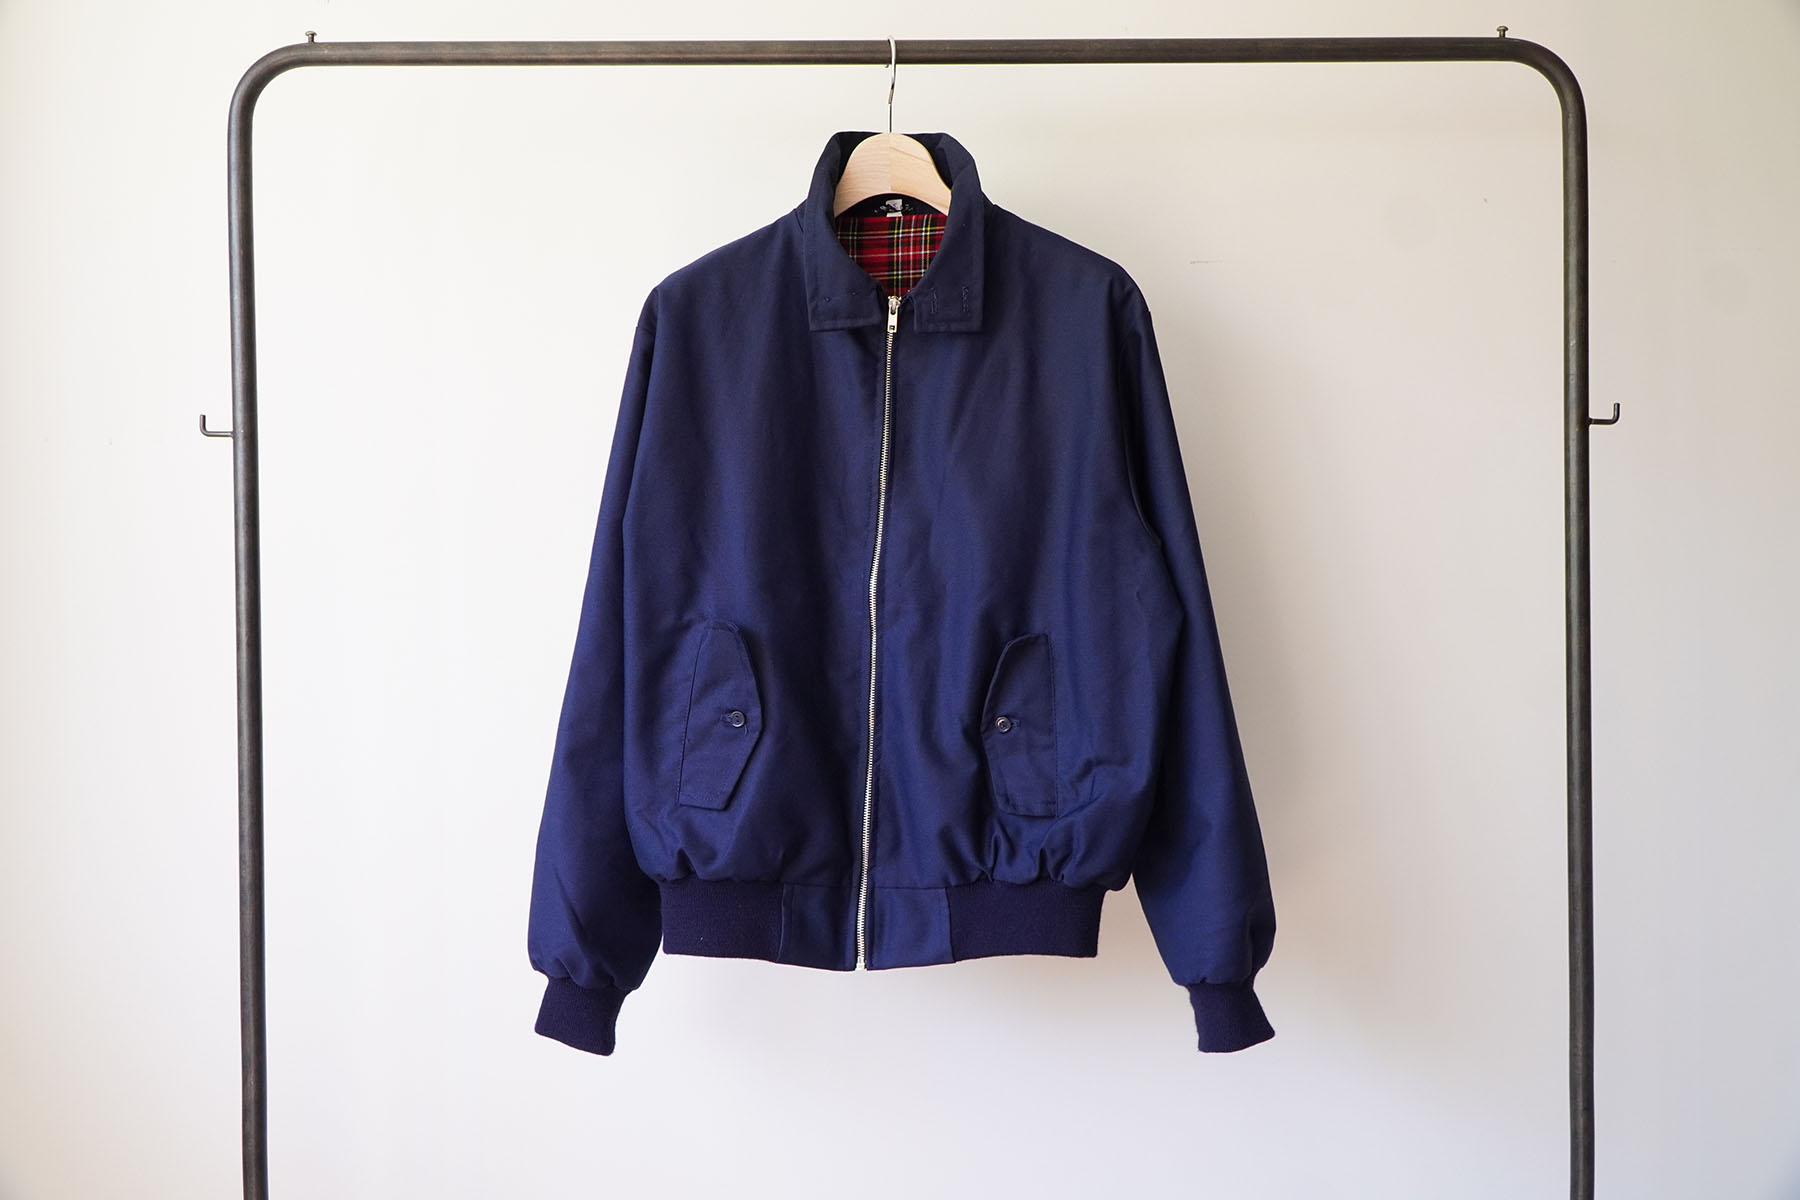 Cardigan and Harrington jacket 24SS recommend item tops